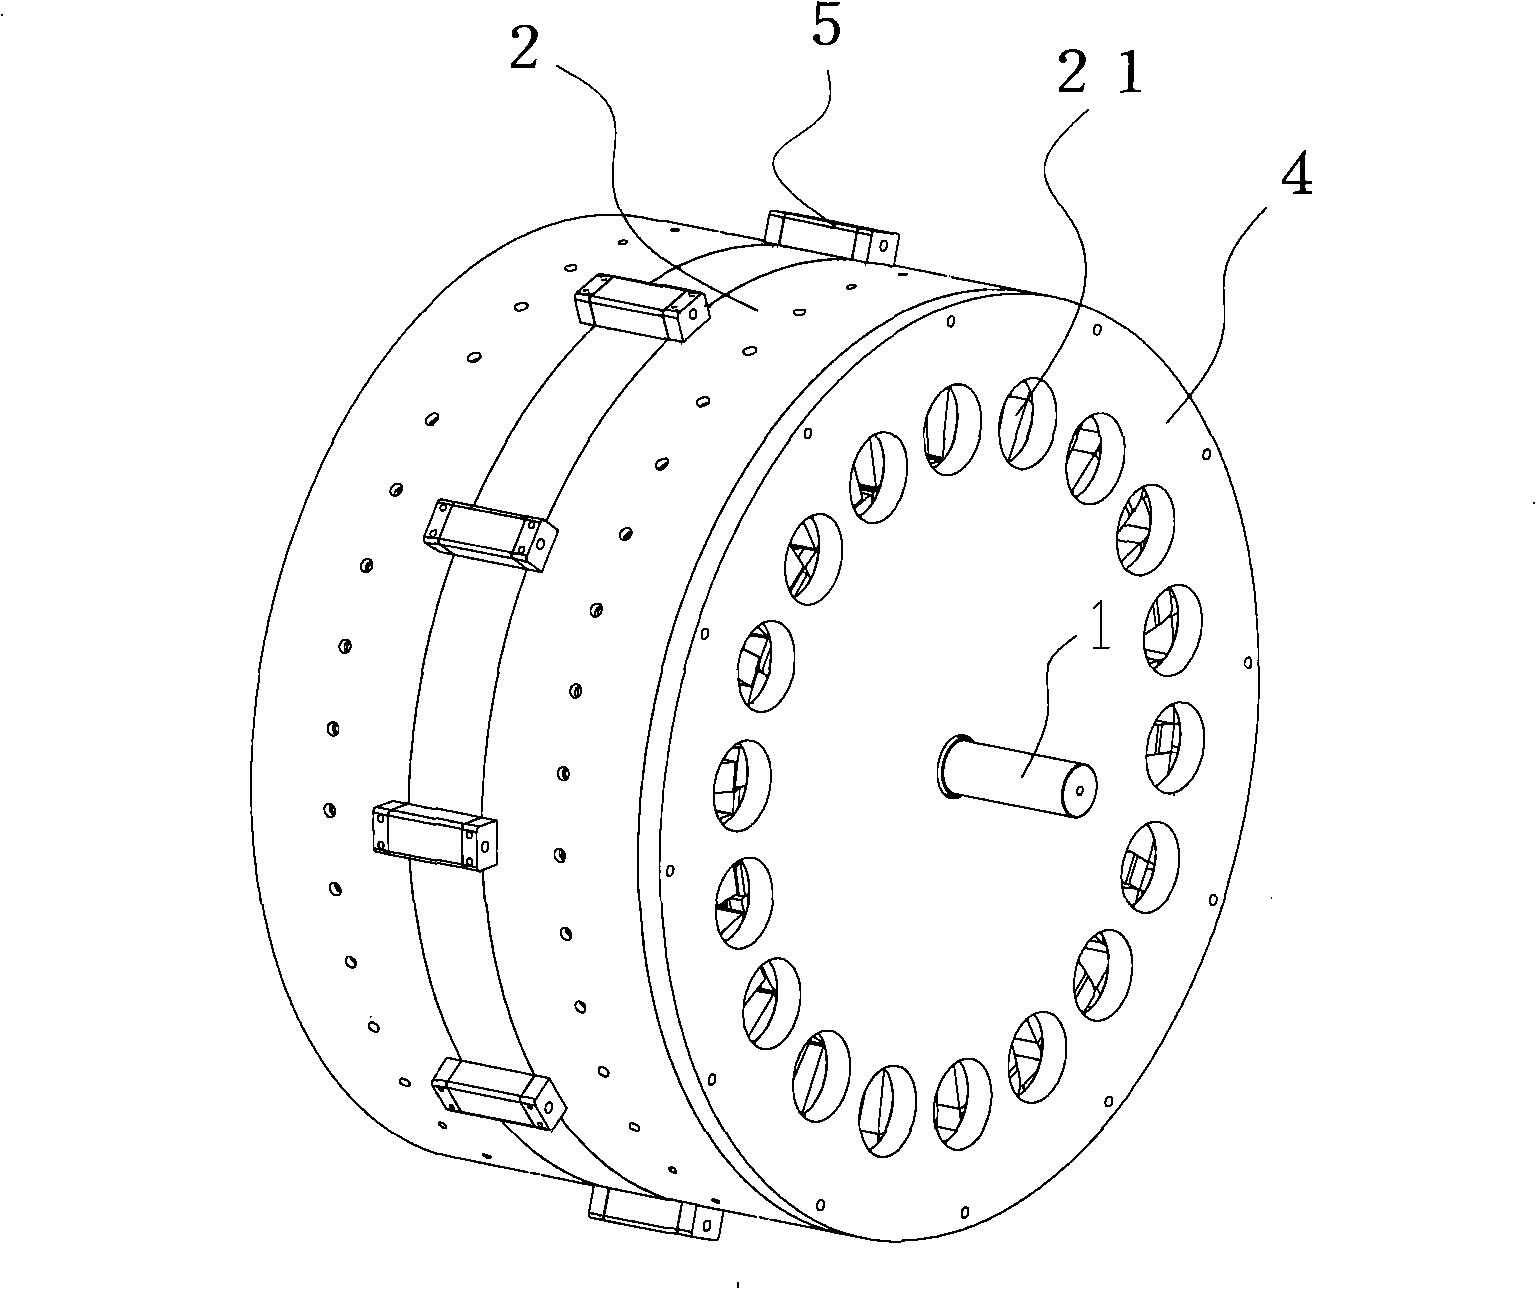 Frequency stabilization control system of permanent magnet wind-driven generator capable of adapting to changing torque